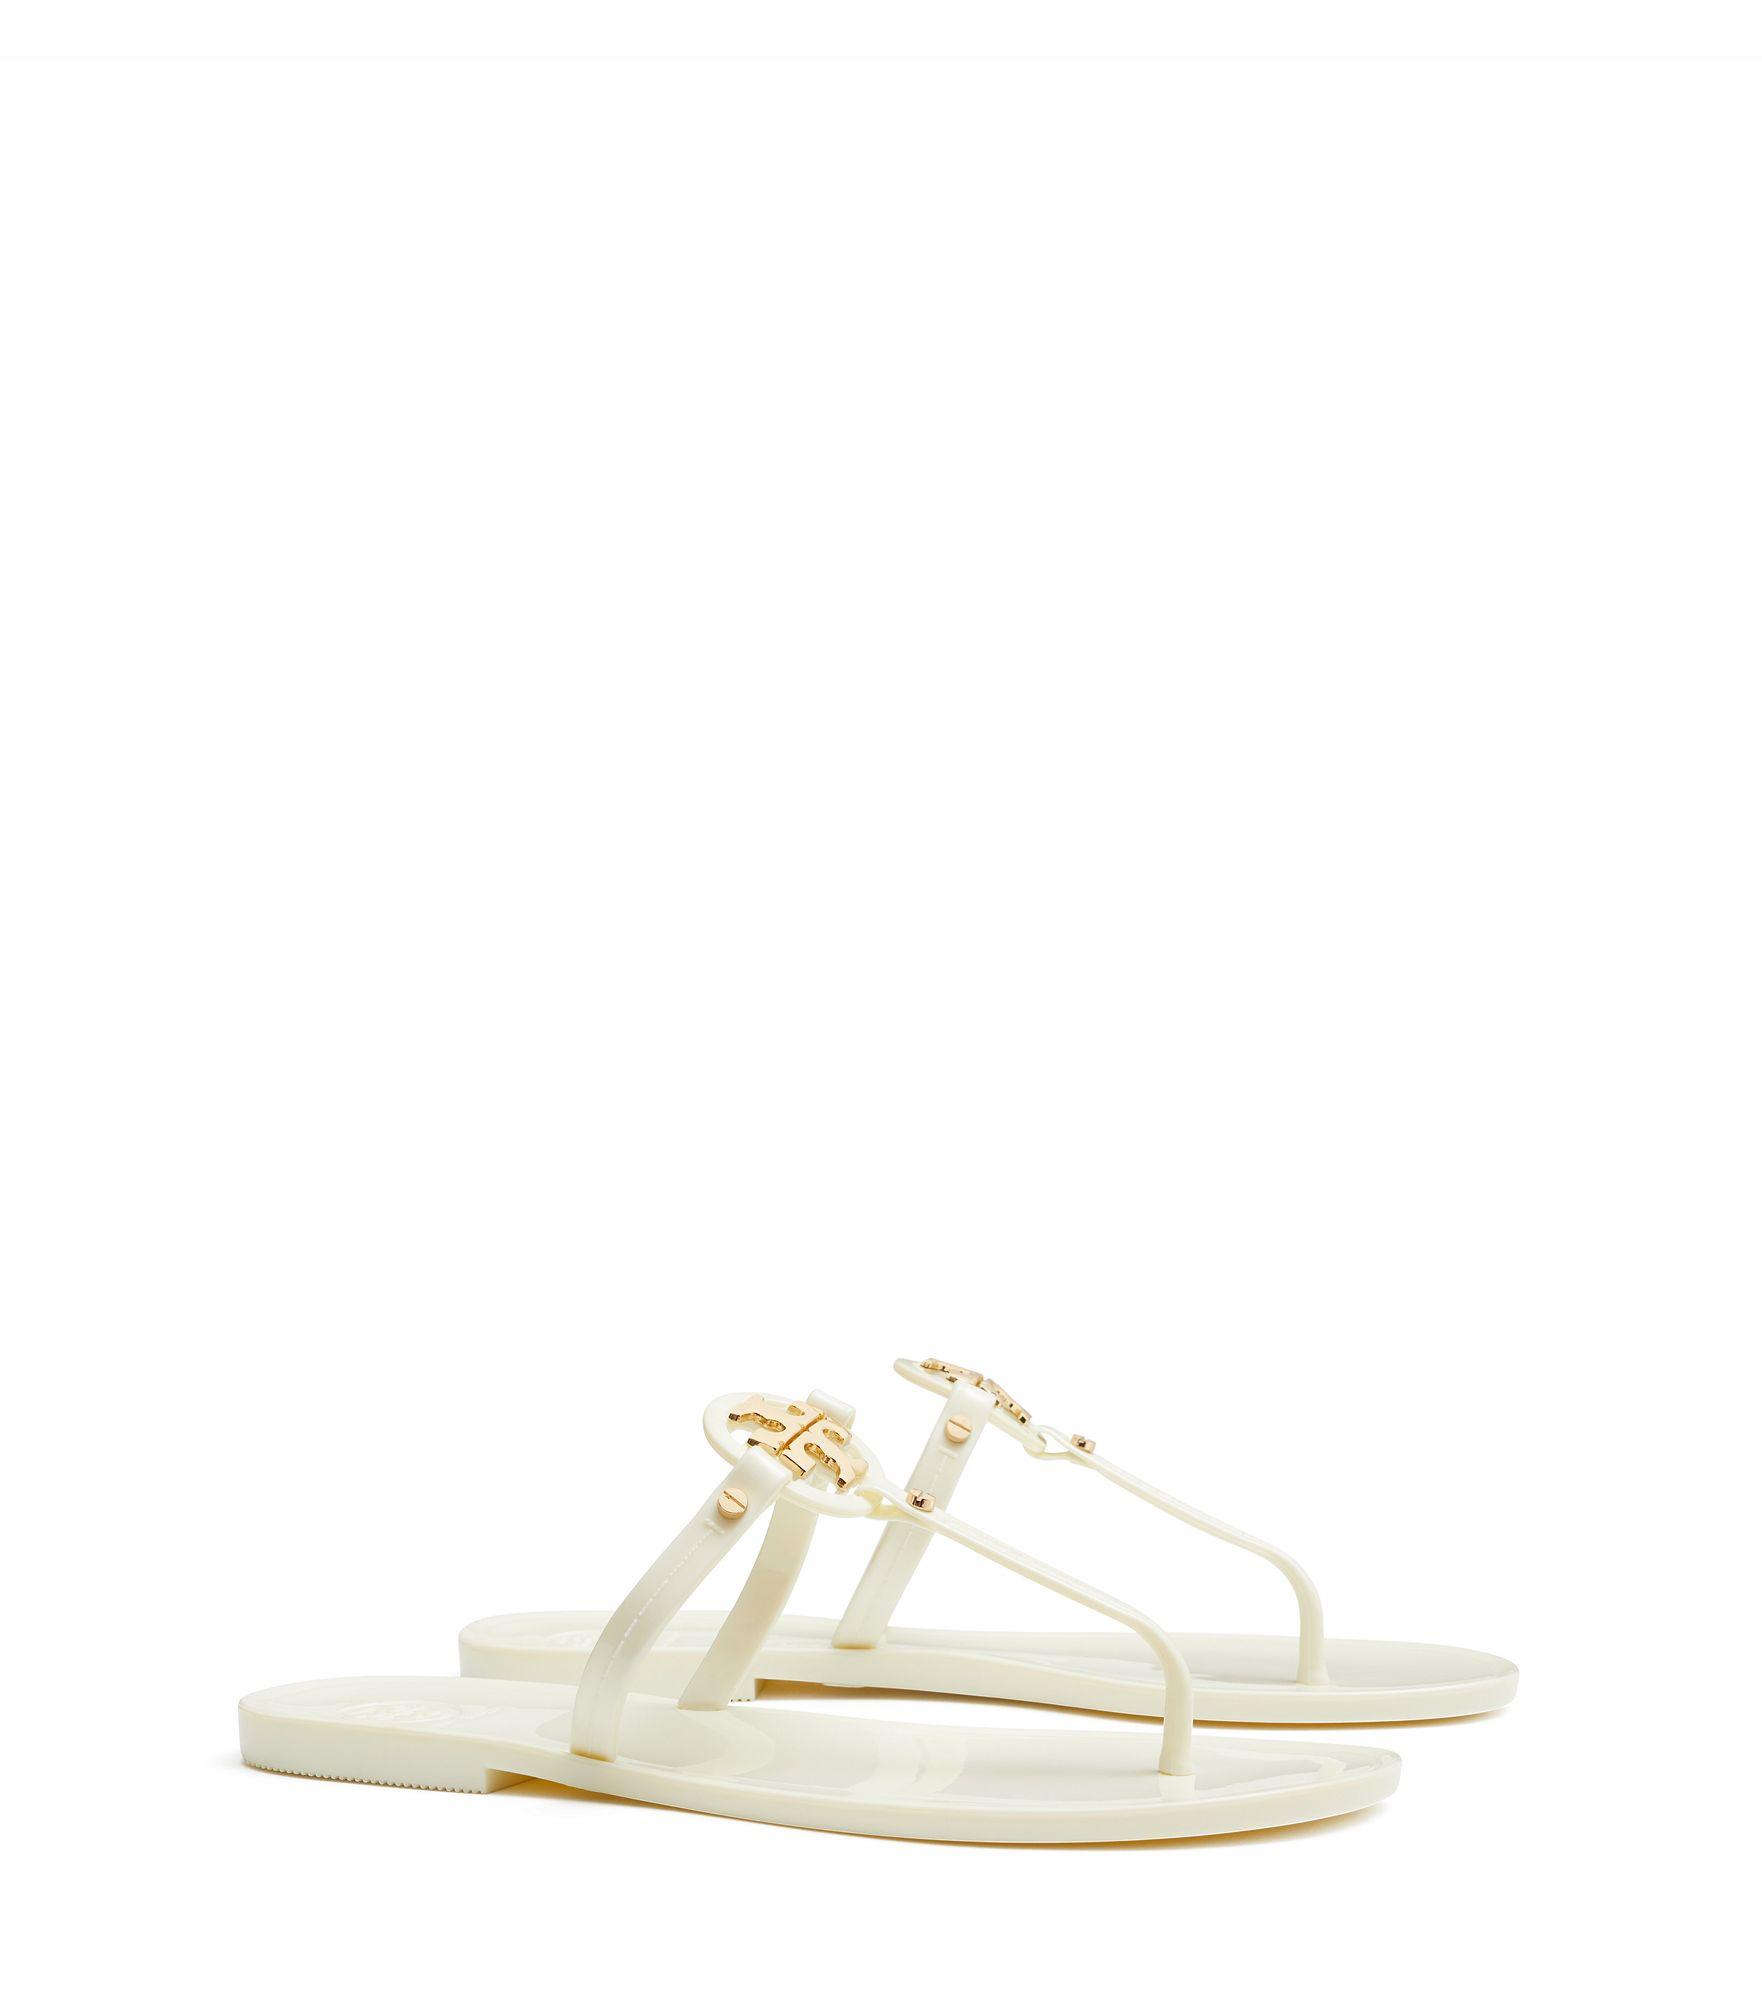 Tory Burch Mini Miller Jelly Thong Sandals in White | Lyst UK